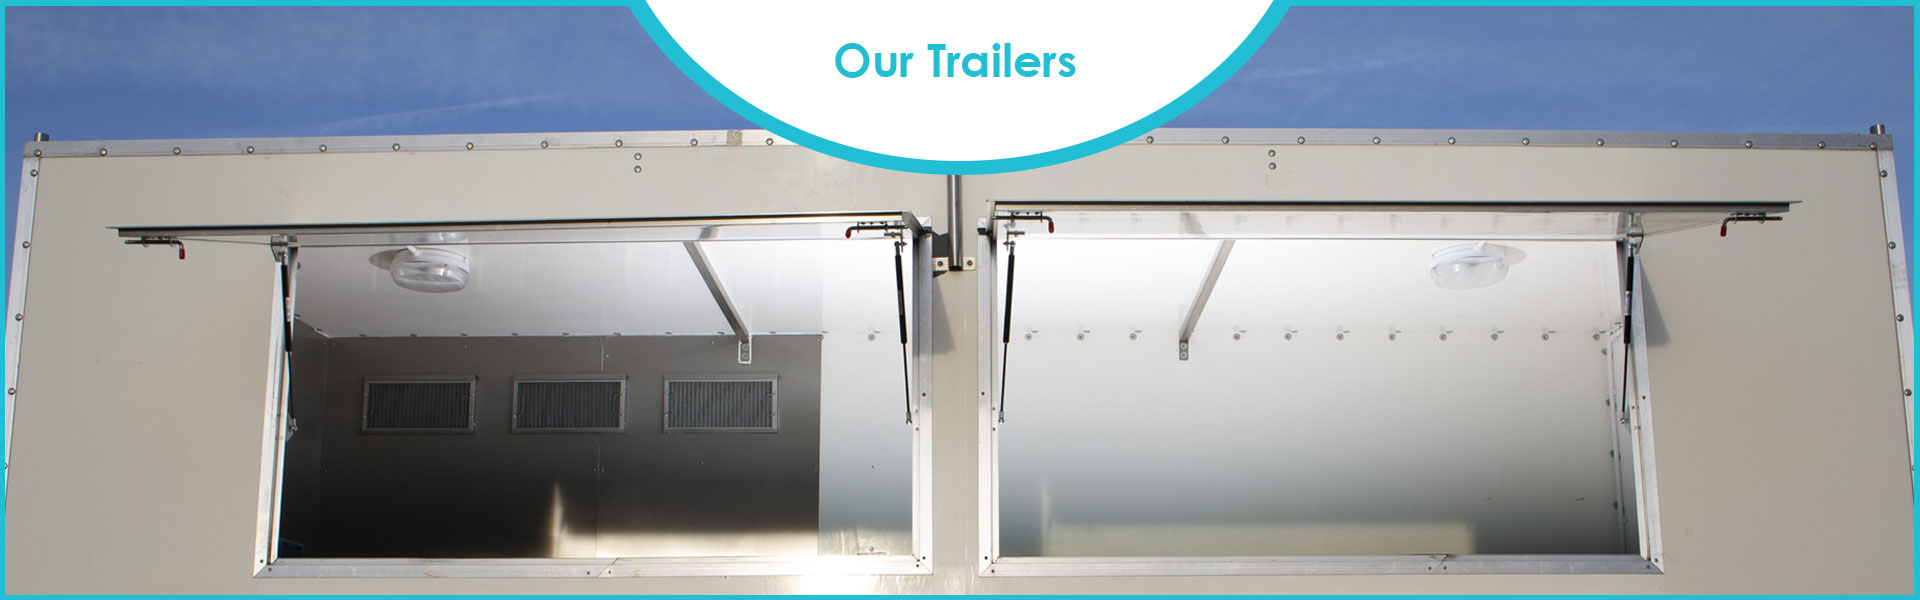 Catering-trailer-hire-our-trailers-header-2